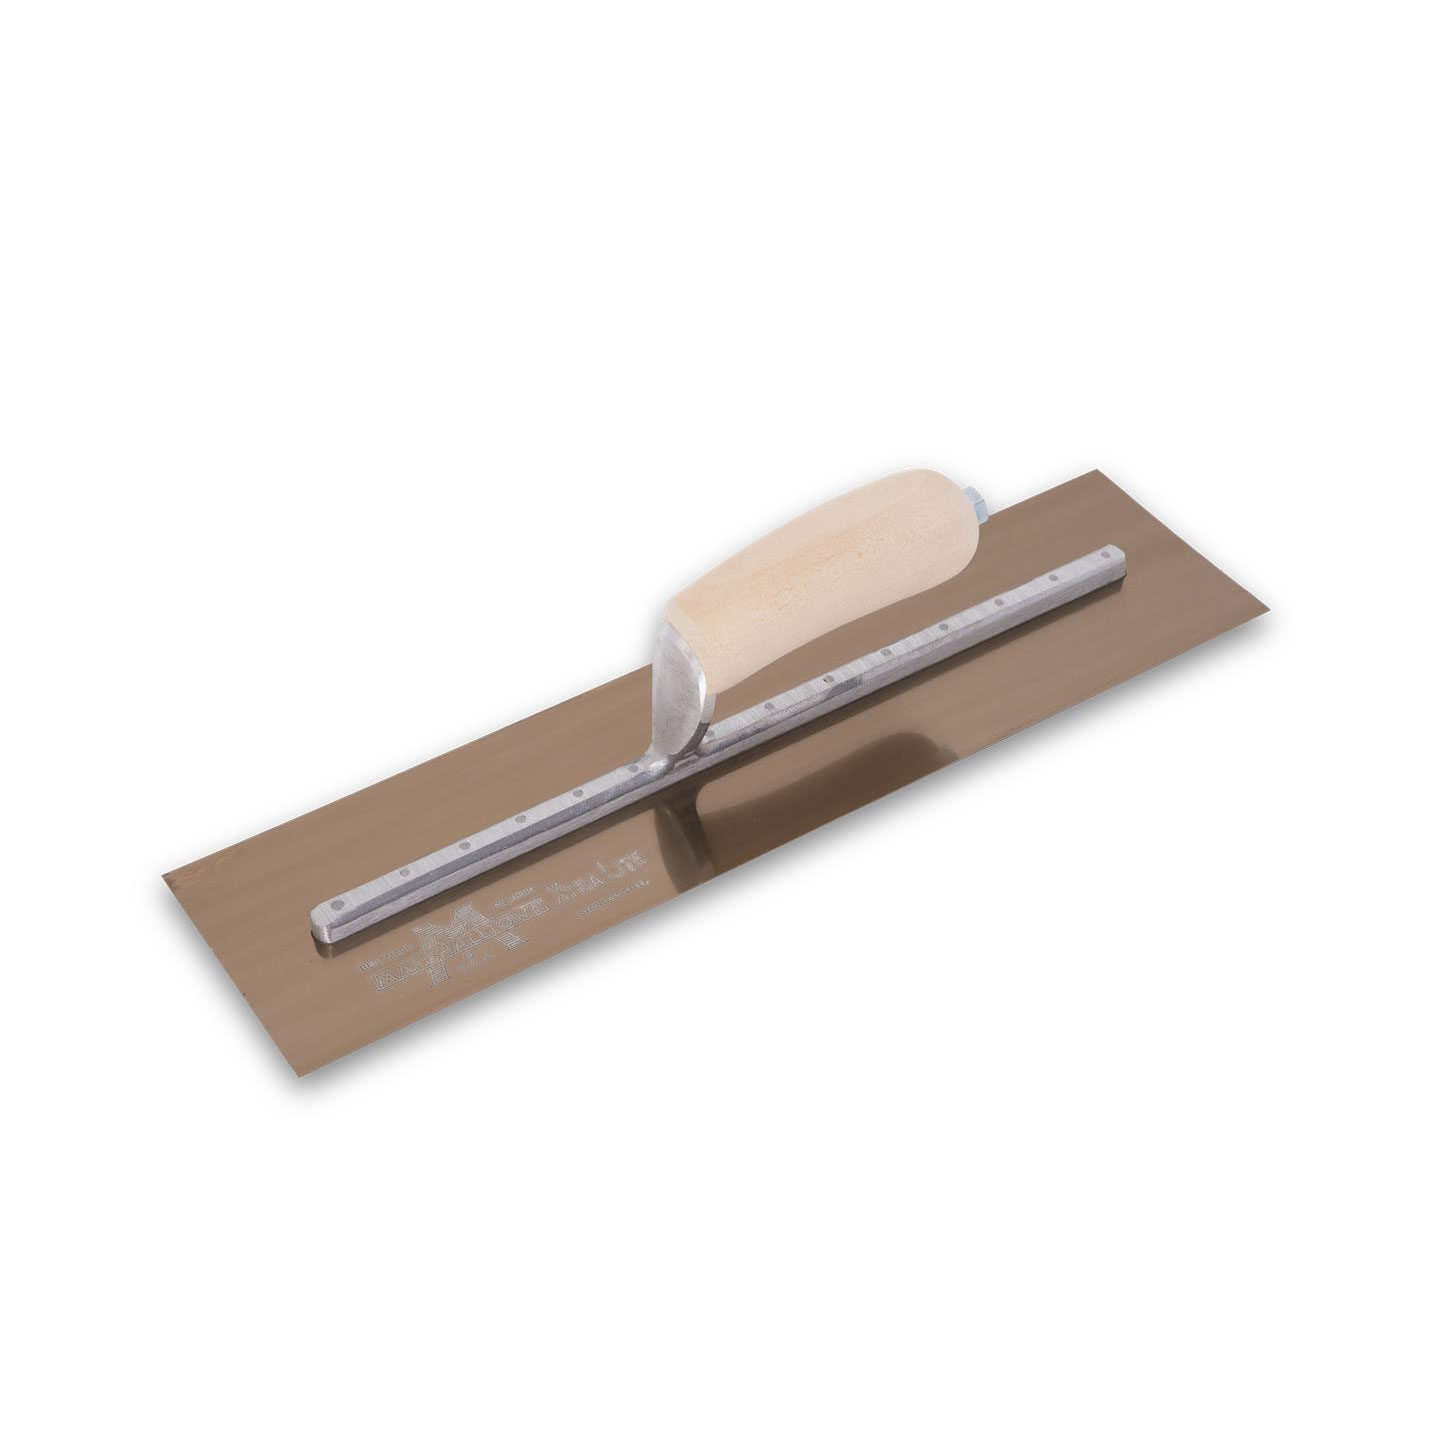 Marshalltown MXS165GS 16in. x 5in. Golden Stainless Steel Finishing Trowel with Wood MXS165GS